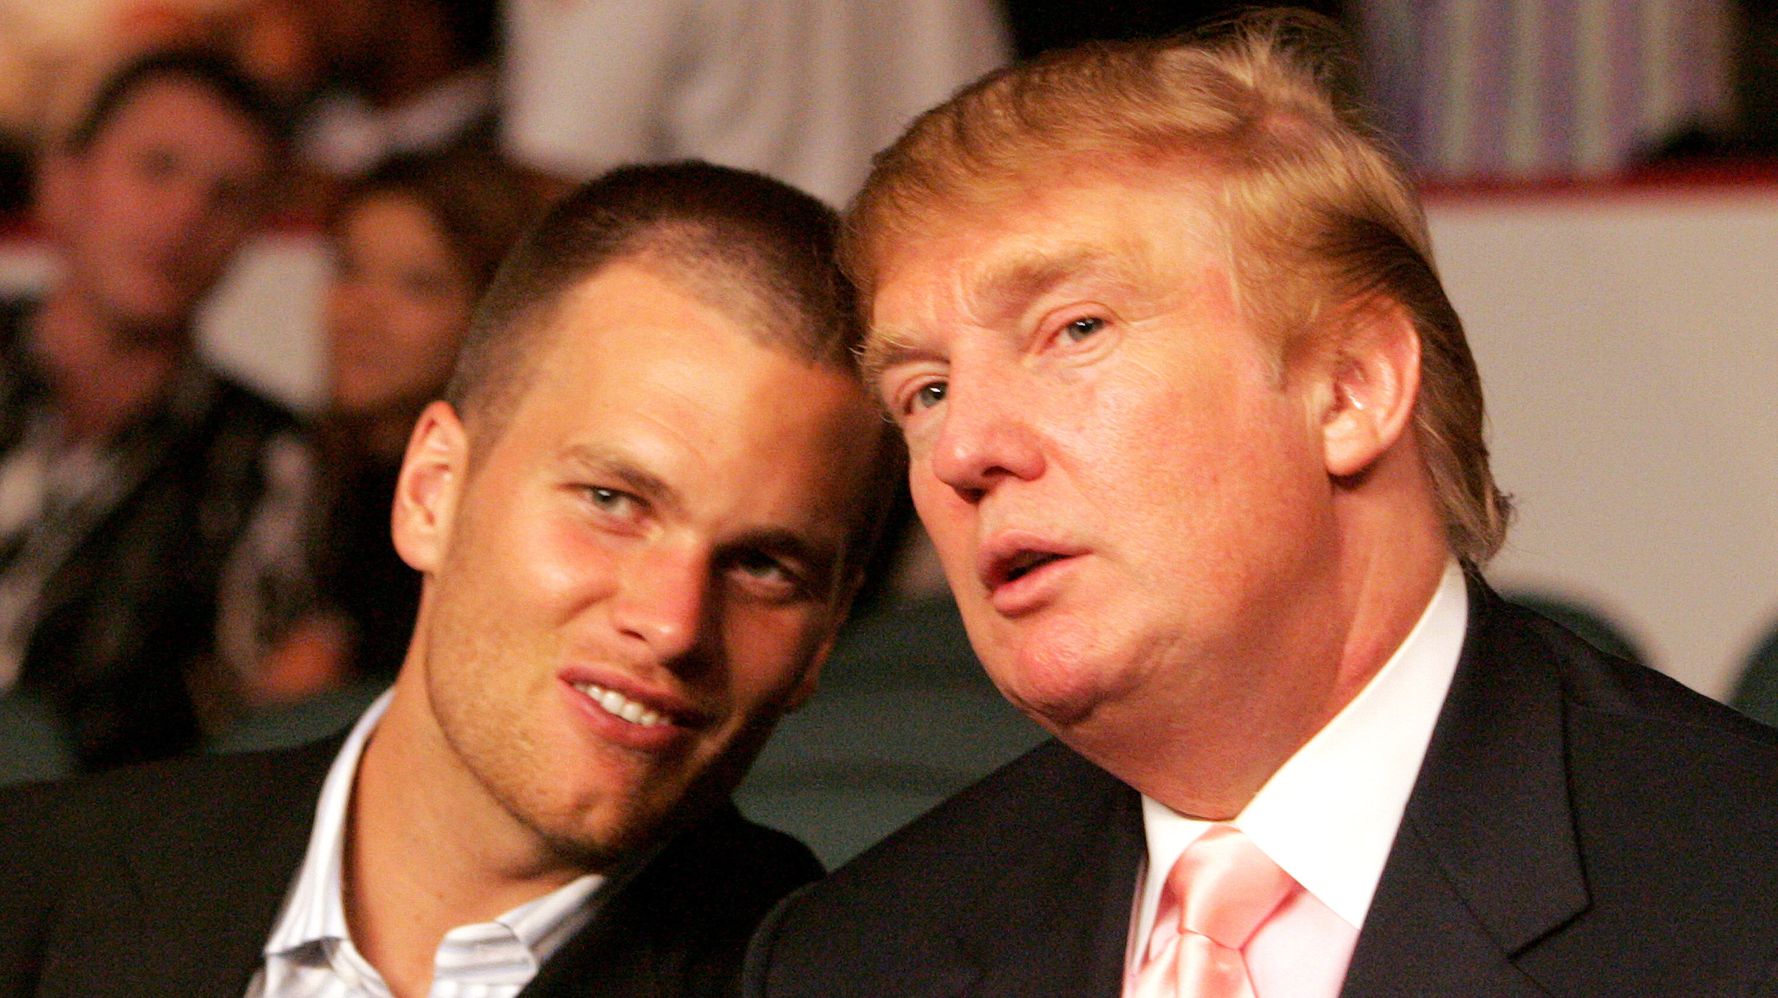 Tom Brady's Joke About Donald Trump Was Intended For 1 Reason, Says Skip Bayless